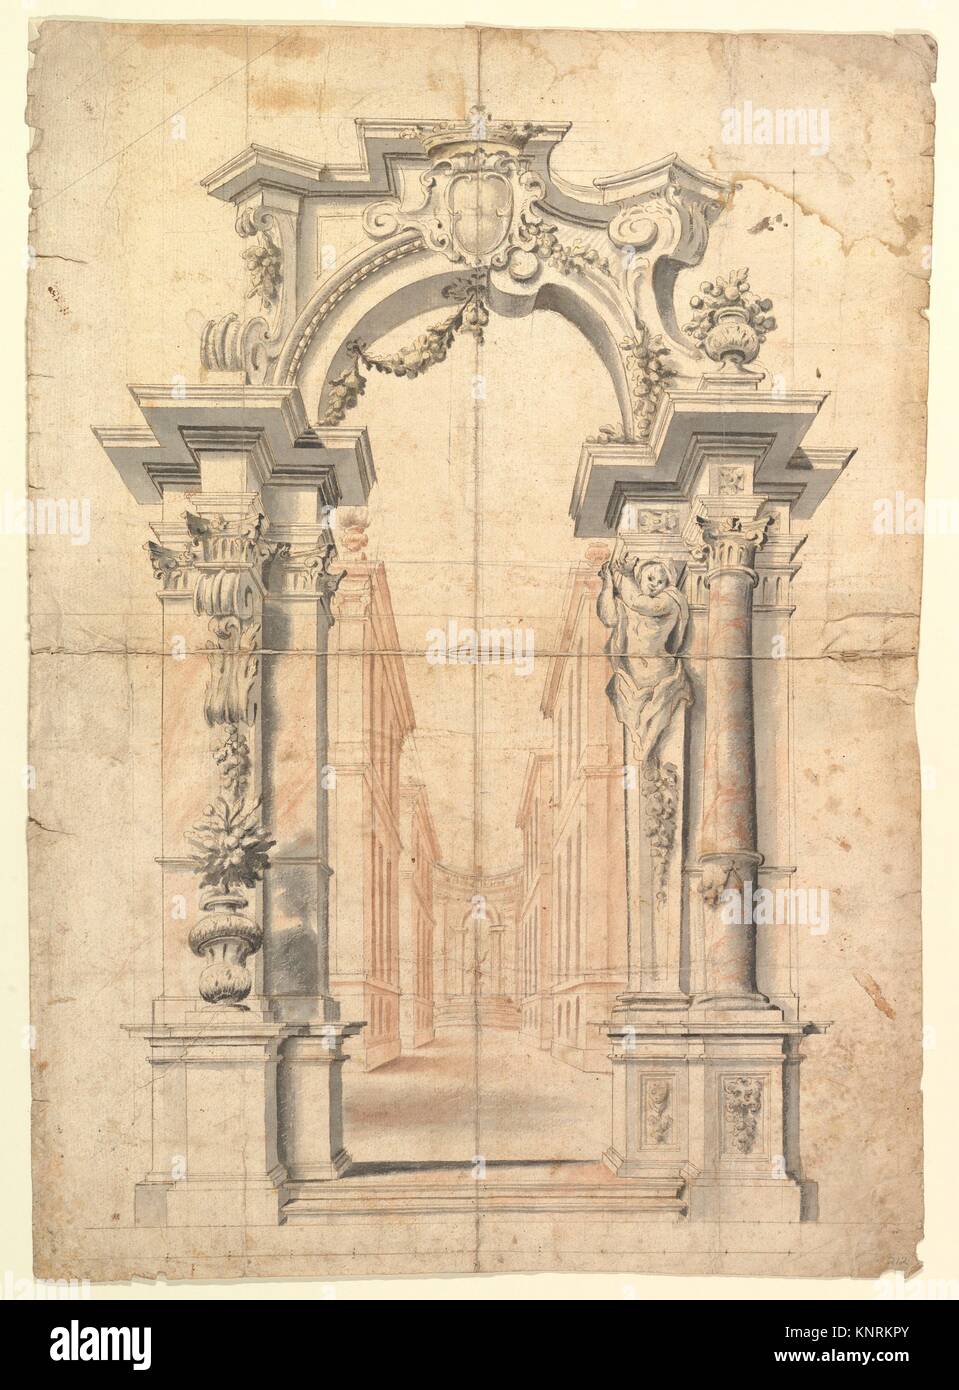 Two One Half Variants of a Design for Painted Wall Decoration with Arch and Perspective View Inside (recto). Negligible diagrams and compass drawn Stock Photo